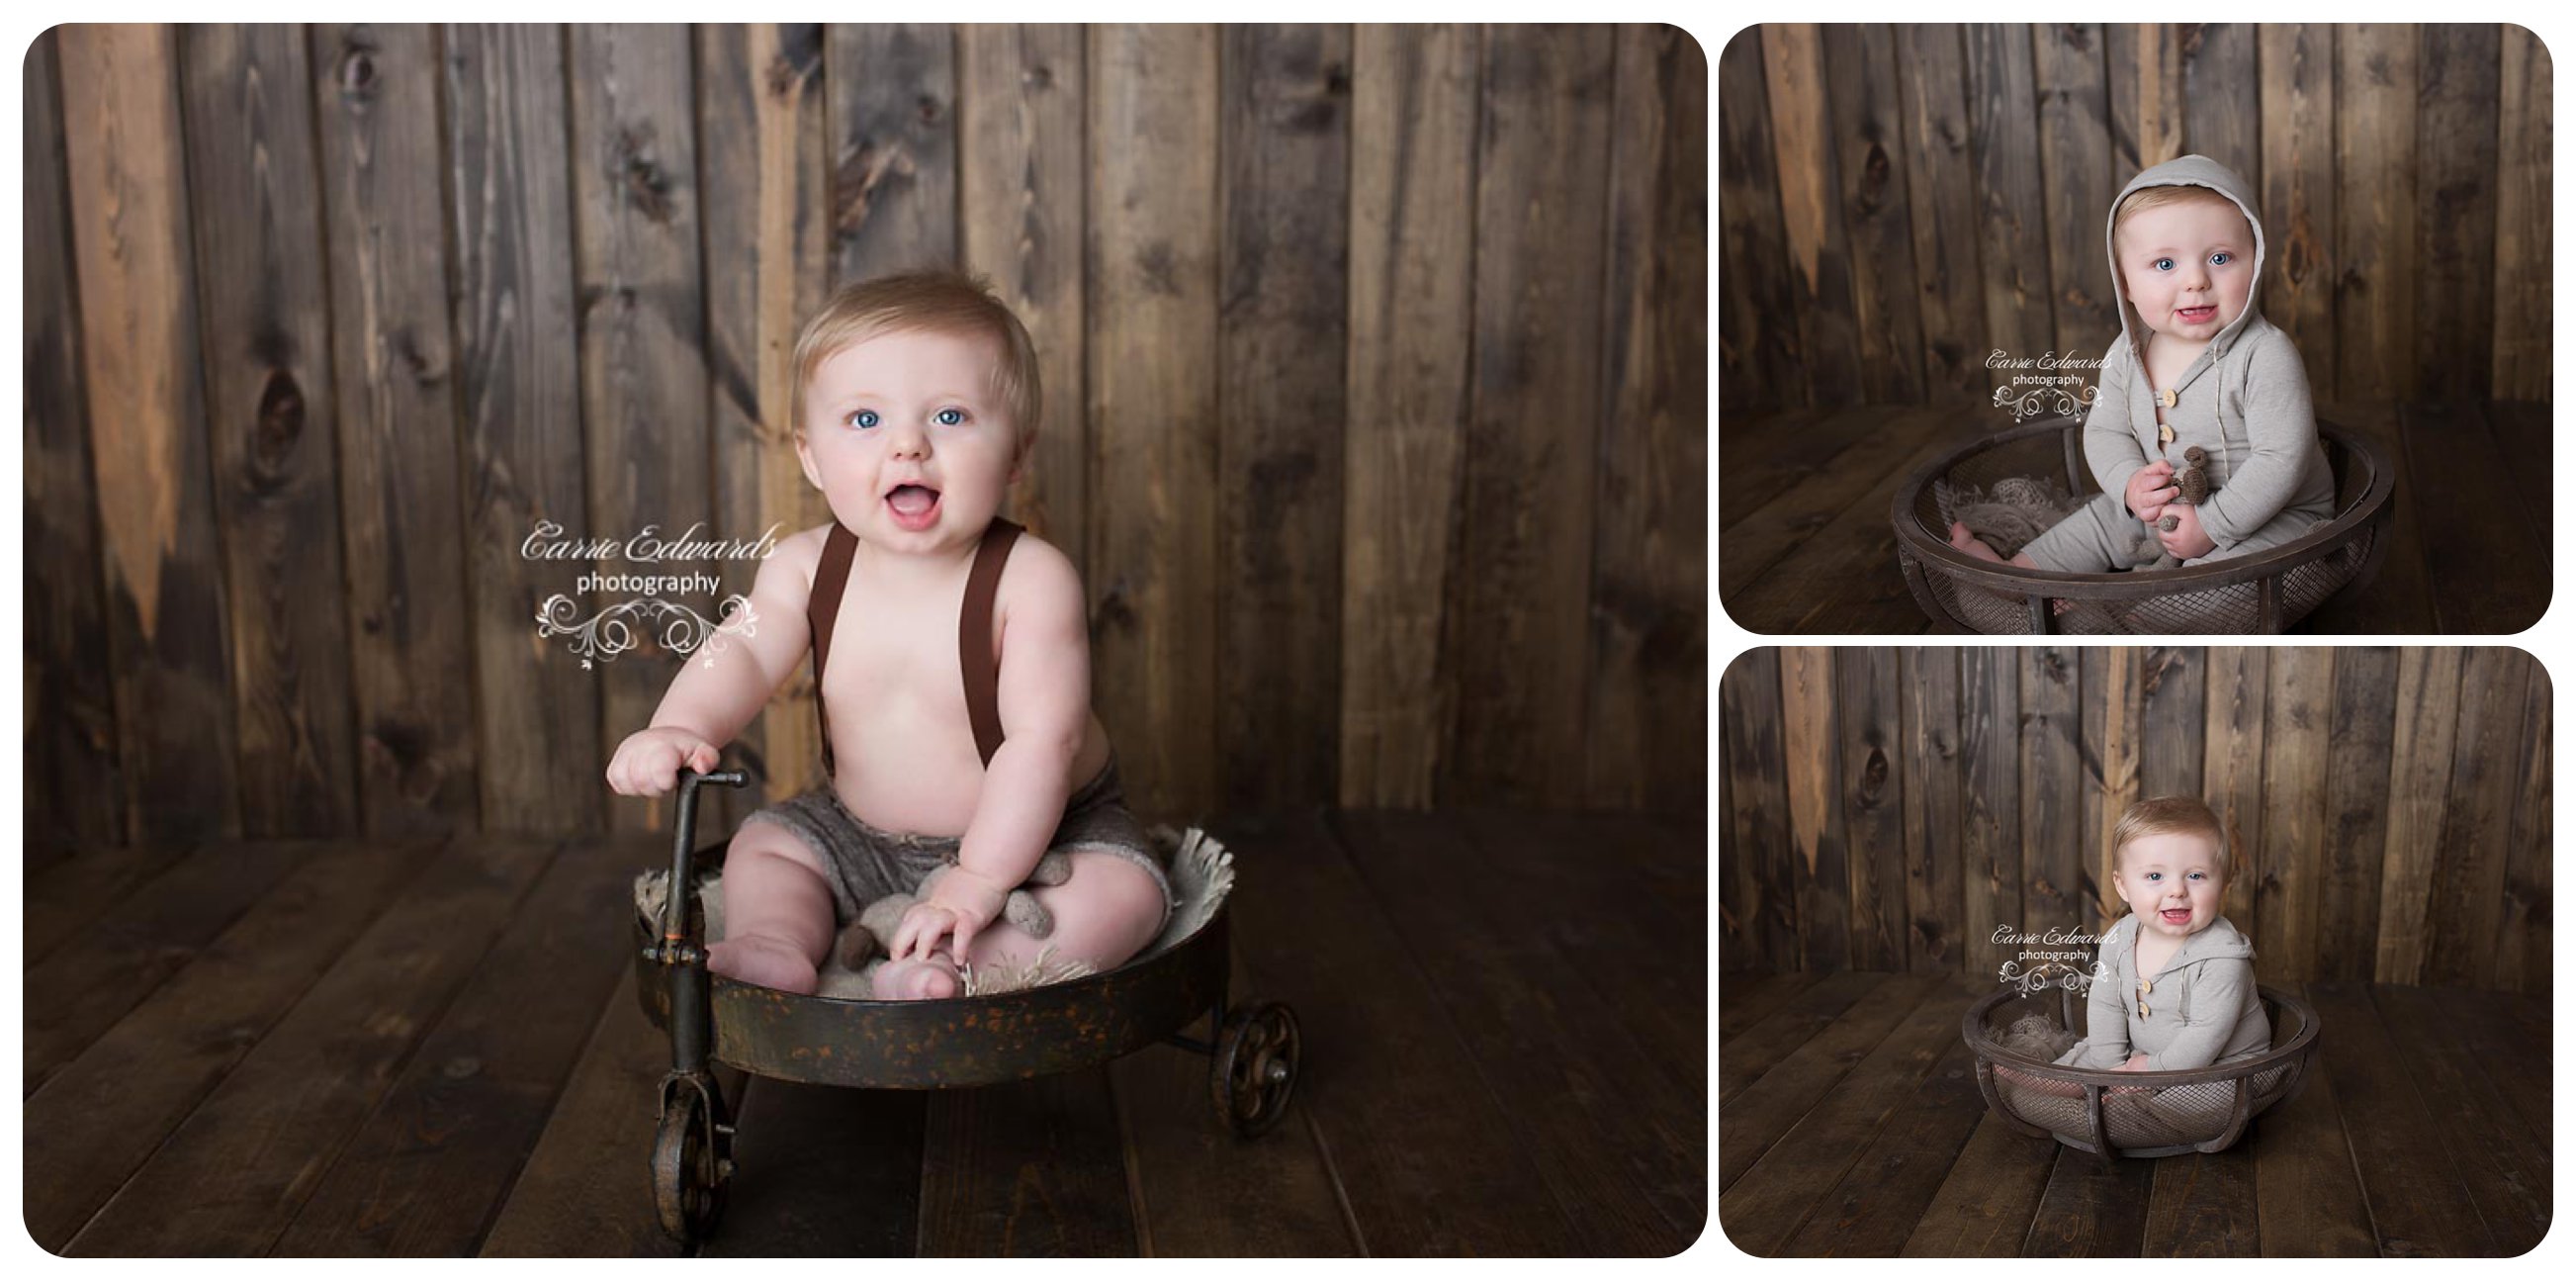 Evergreen Newborn Photographer, Toddler Session, 6 Month Session, Milestone Session, Baby Boy, Cute Baby Boy, Carrie Edwards Photography, Baby with suspenders, Baby in wagon, baby in bowl